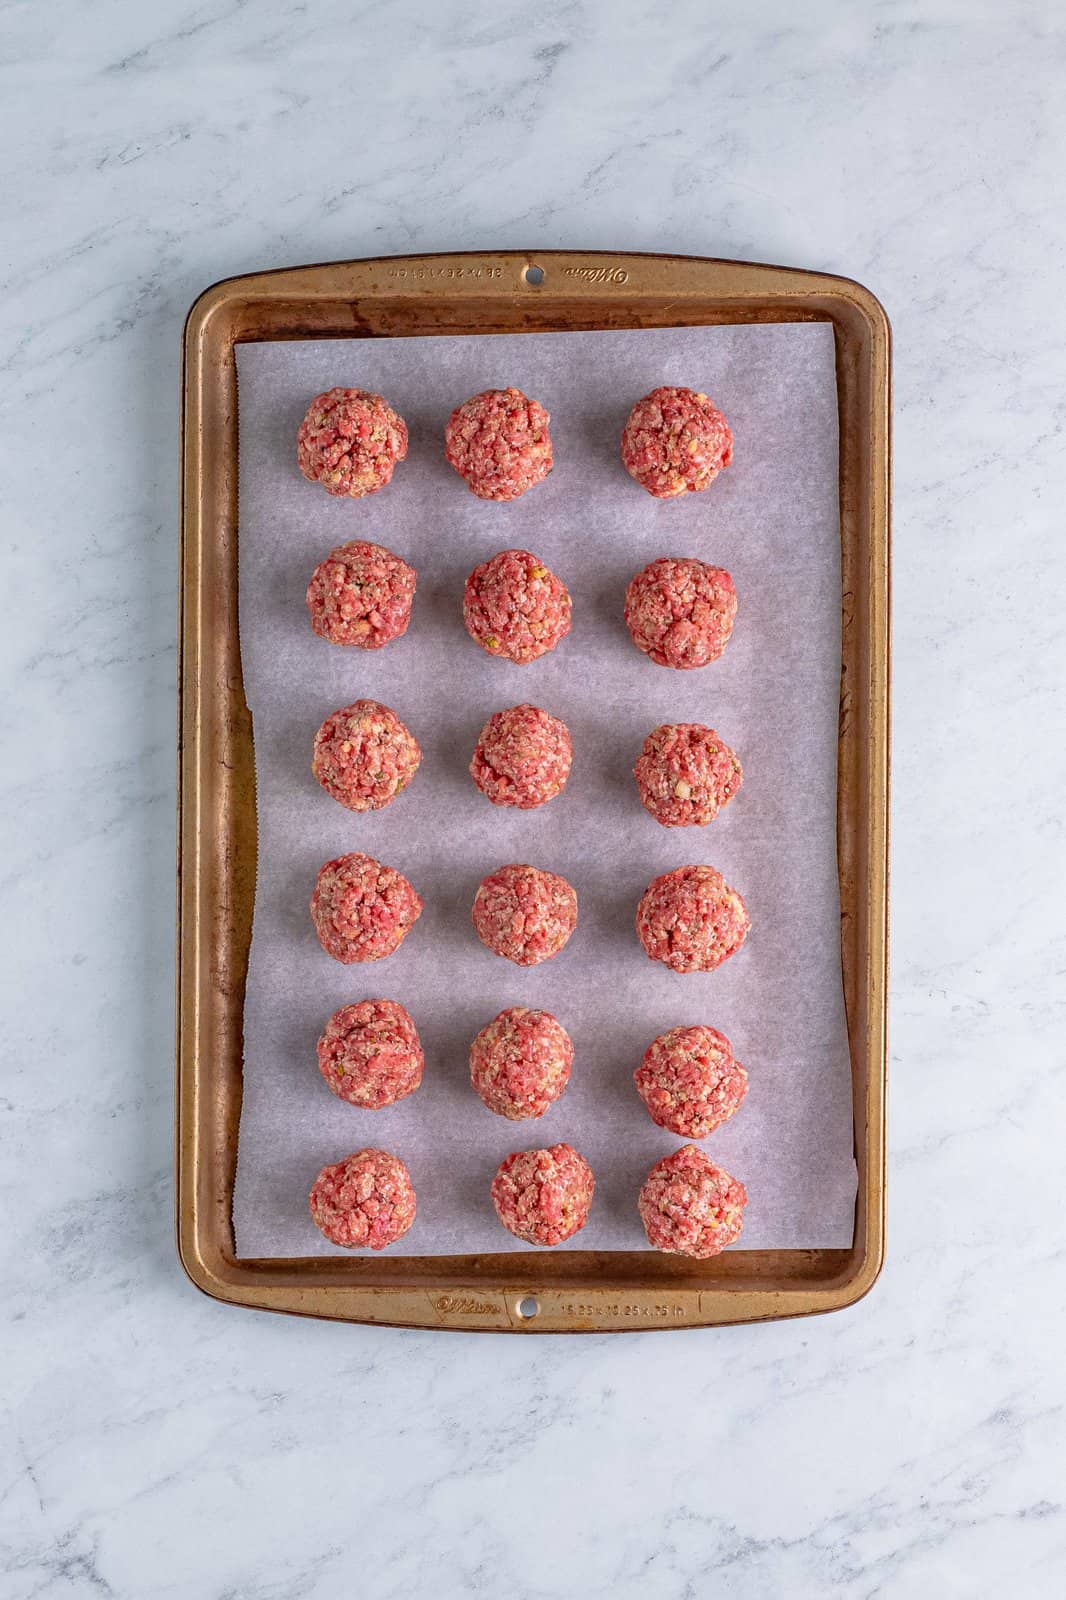 Meatballs on a parchment lined baking tray.